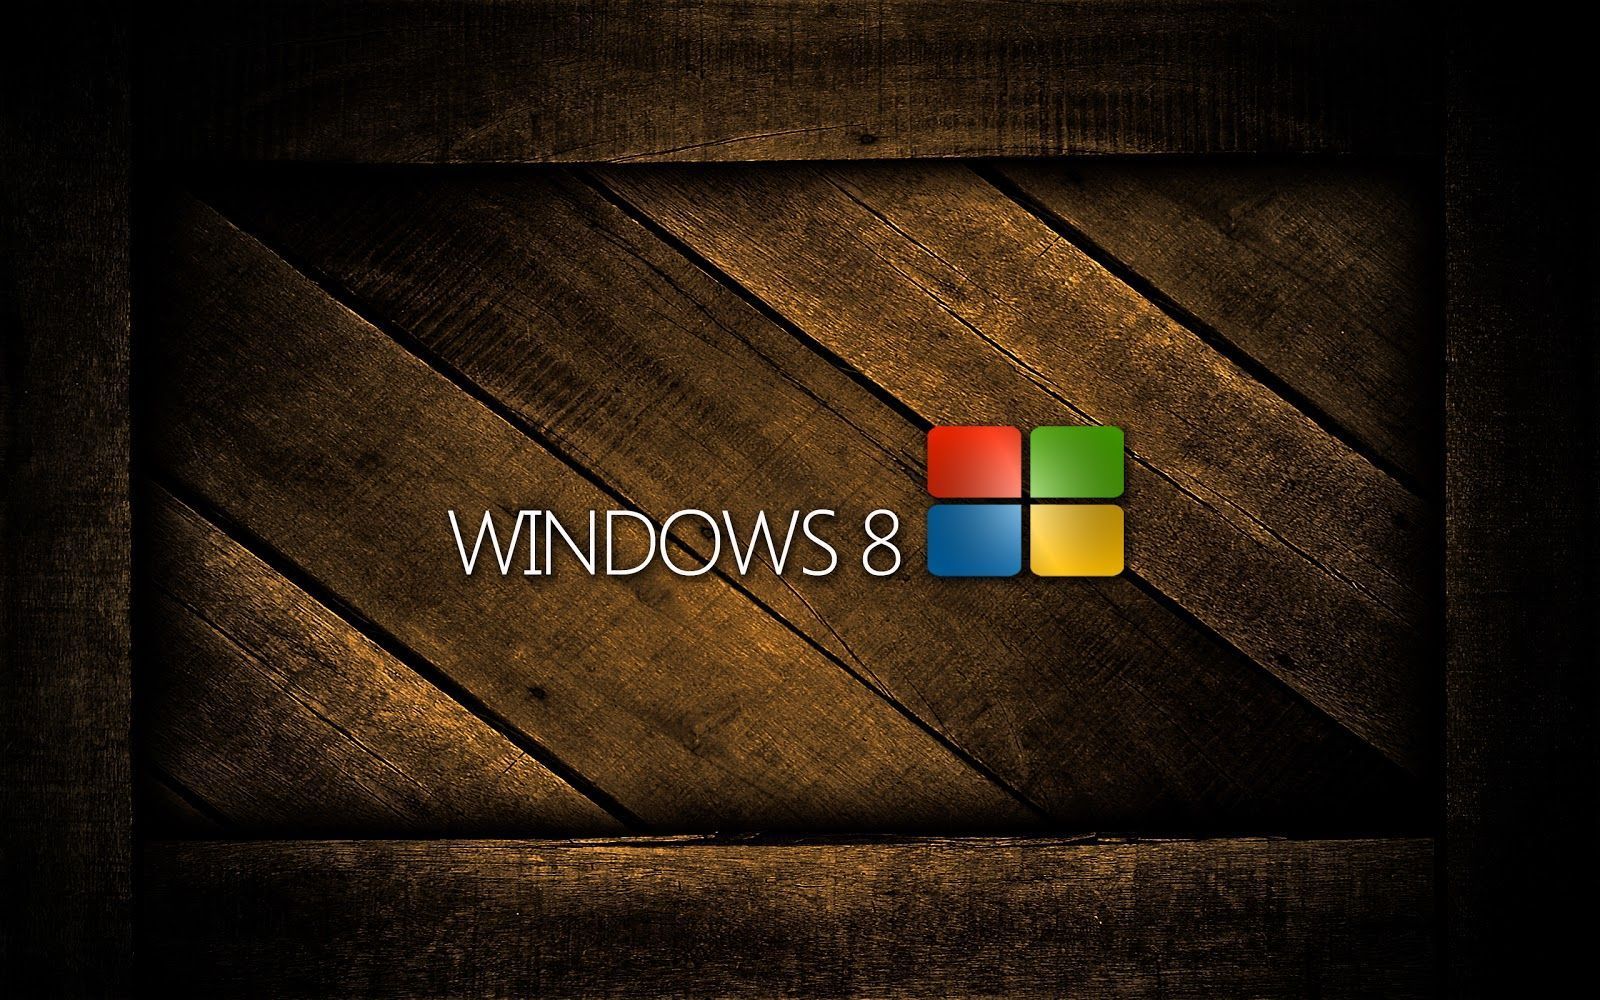 Latest Windows 8 HD Wallpapers Download - PC Games Free Full ...